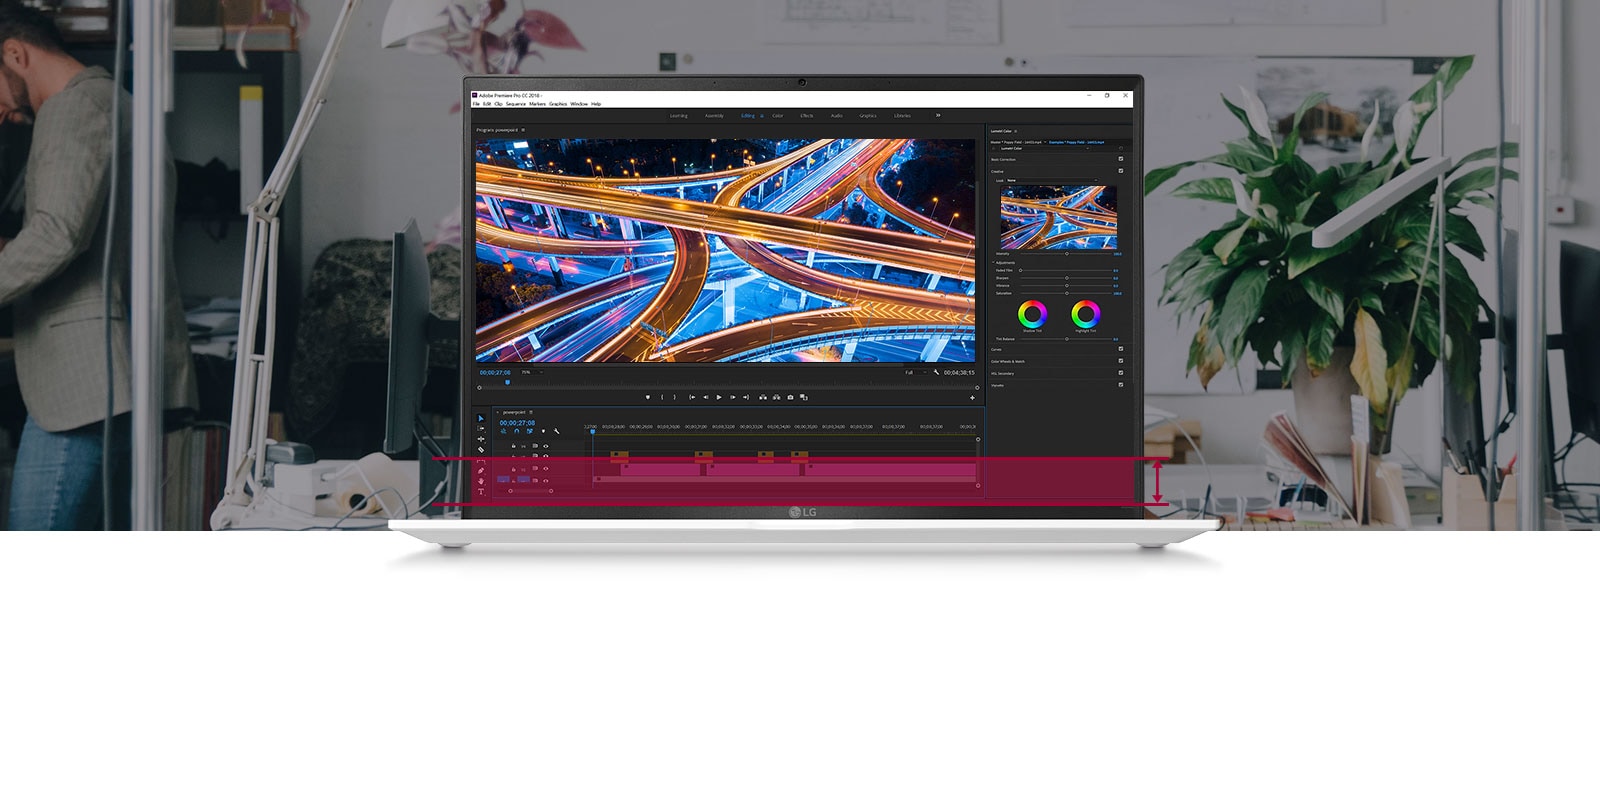 16:10 Large Screen allows you to see more information with no need to scroll down for your video editing work.